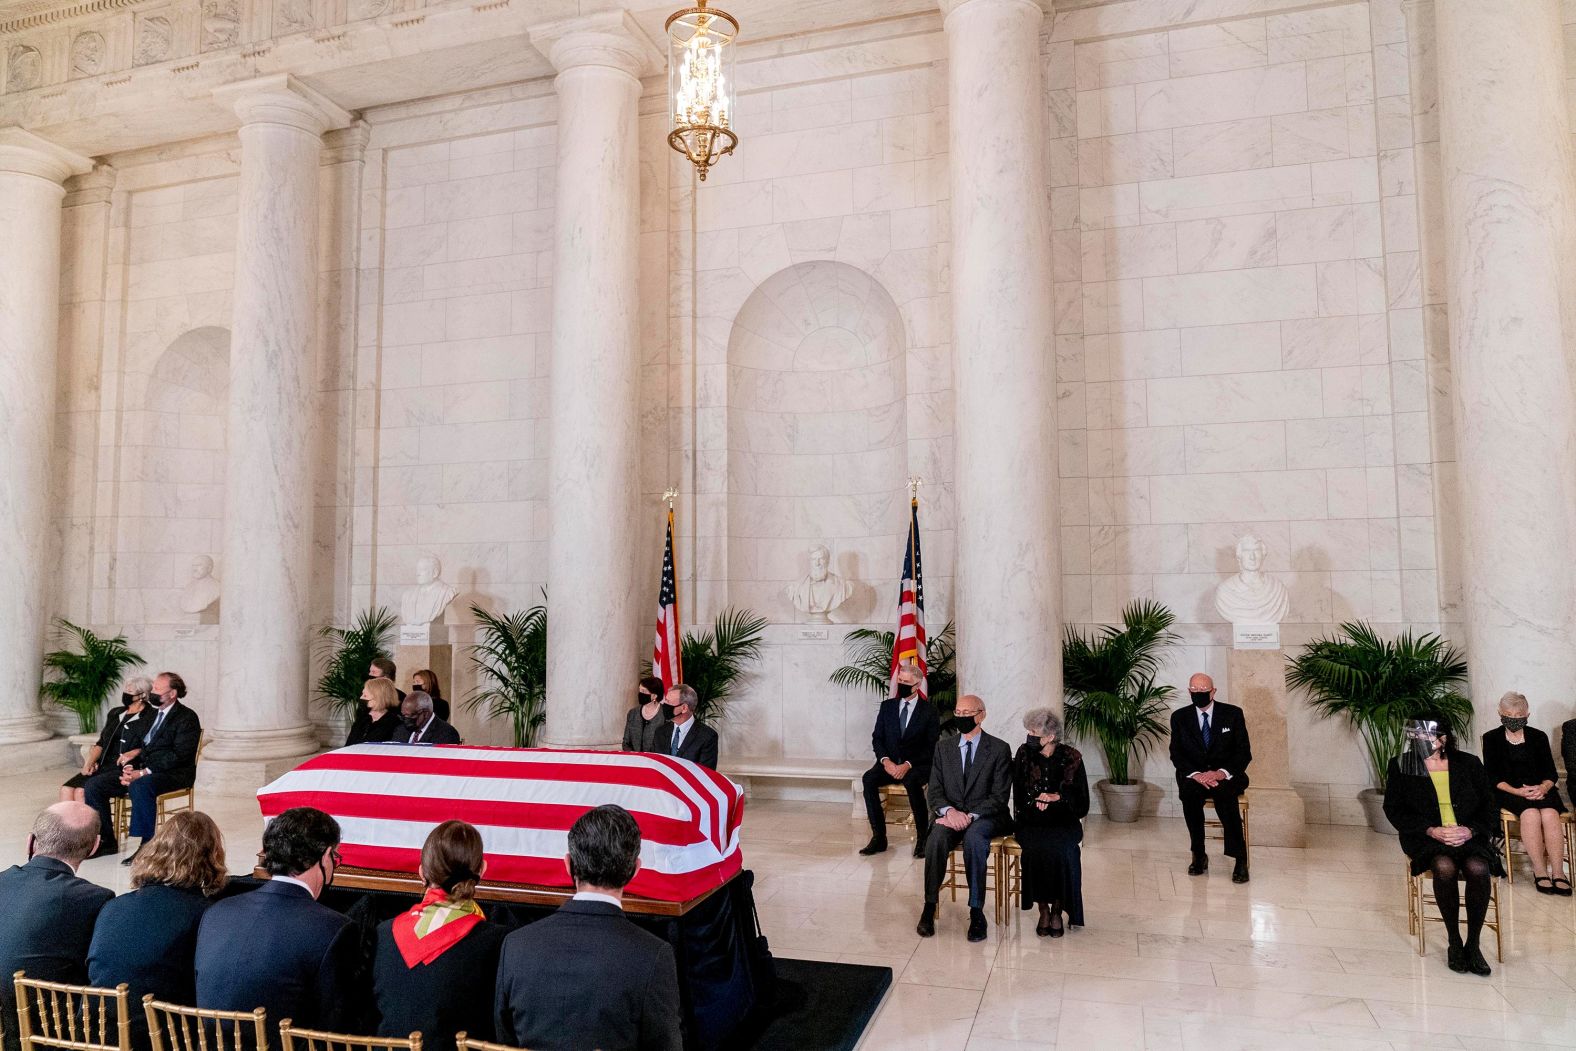 The Supreme Court justices and their spouses sit in front of the casket during a private ceremony Wednesday.